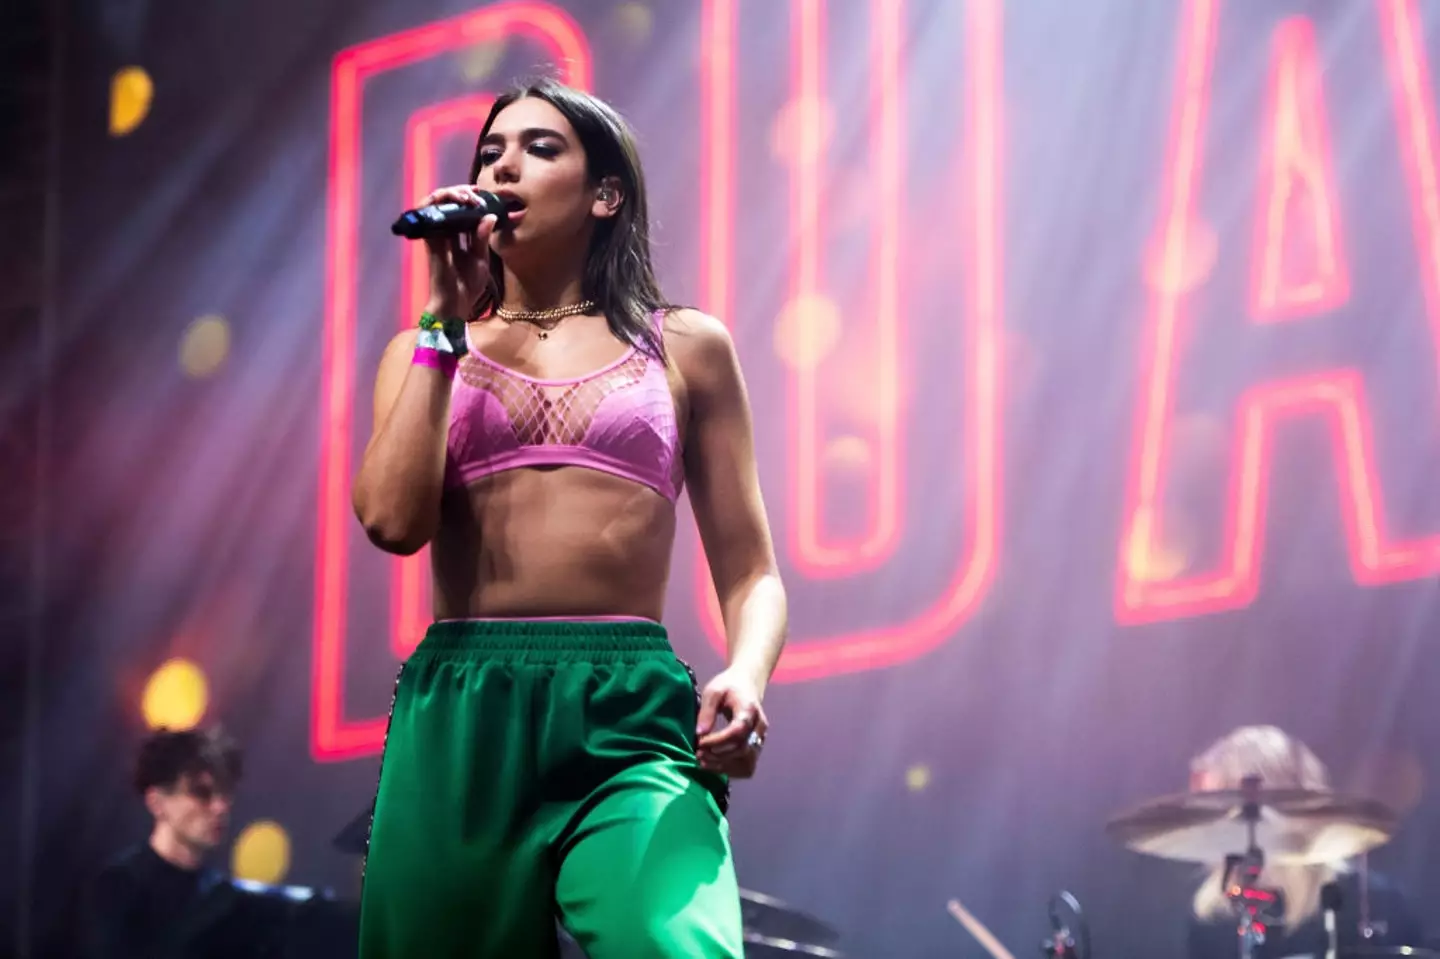 Dua Lipa previously played the smaller John Peel stage in 2017. (Ian Gavan/Getty Images)